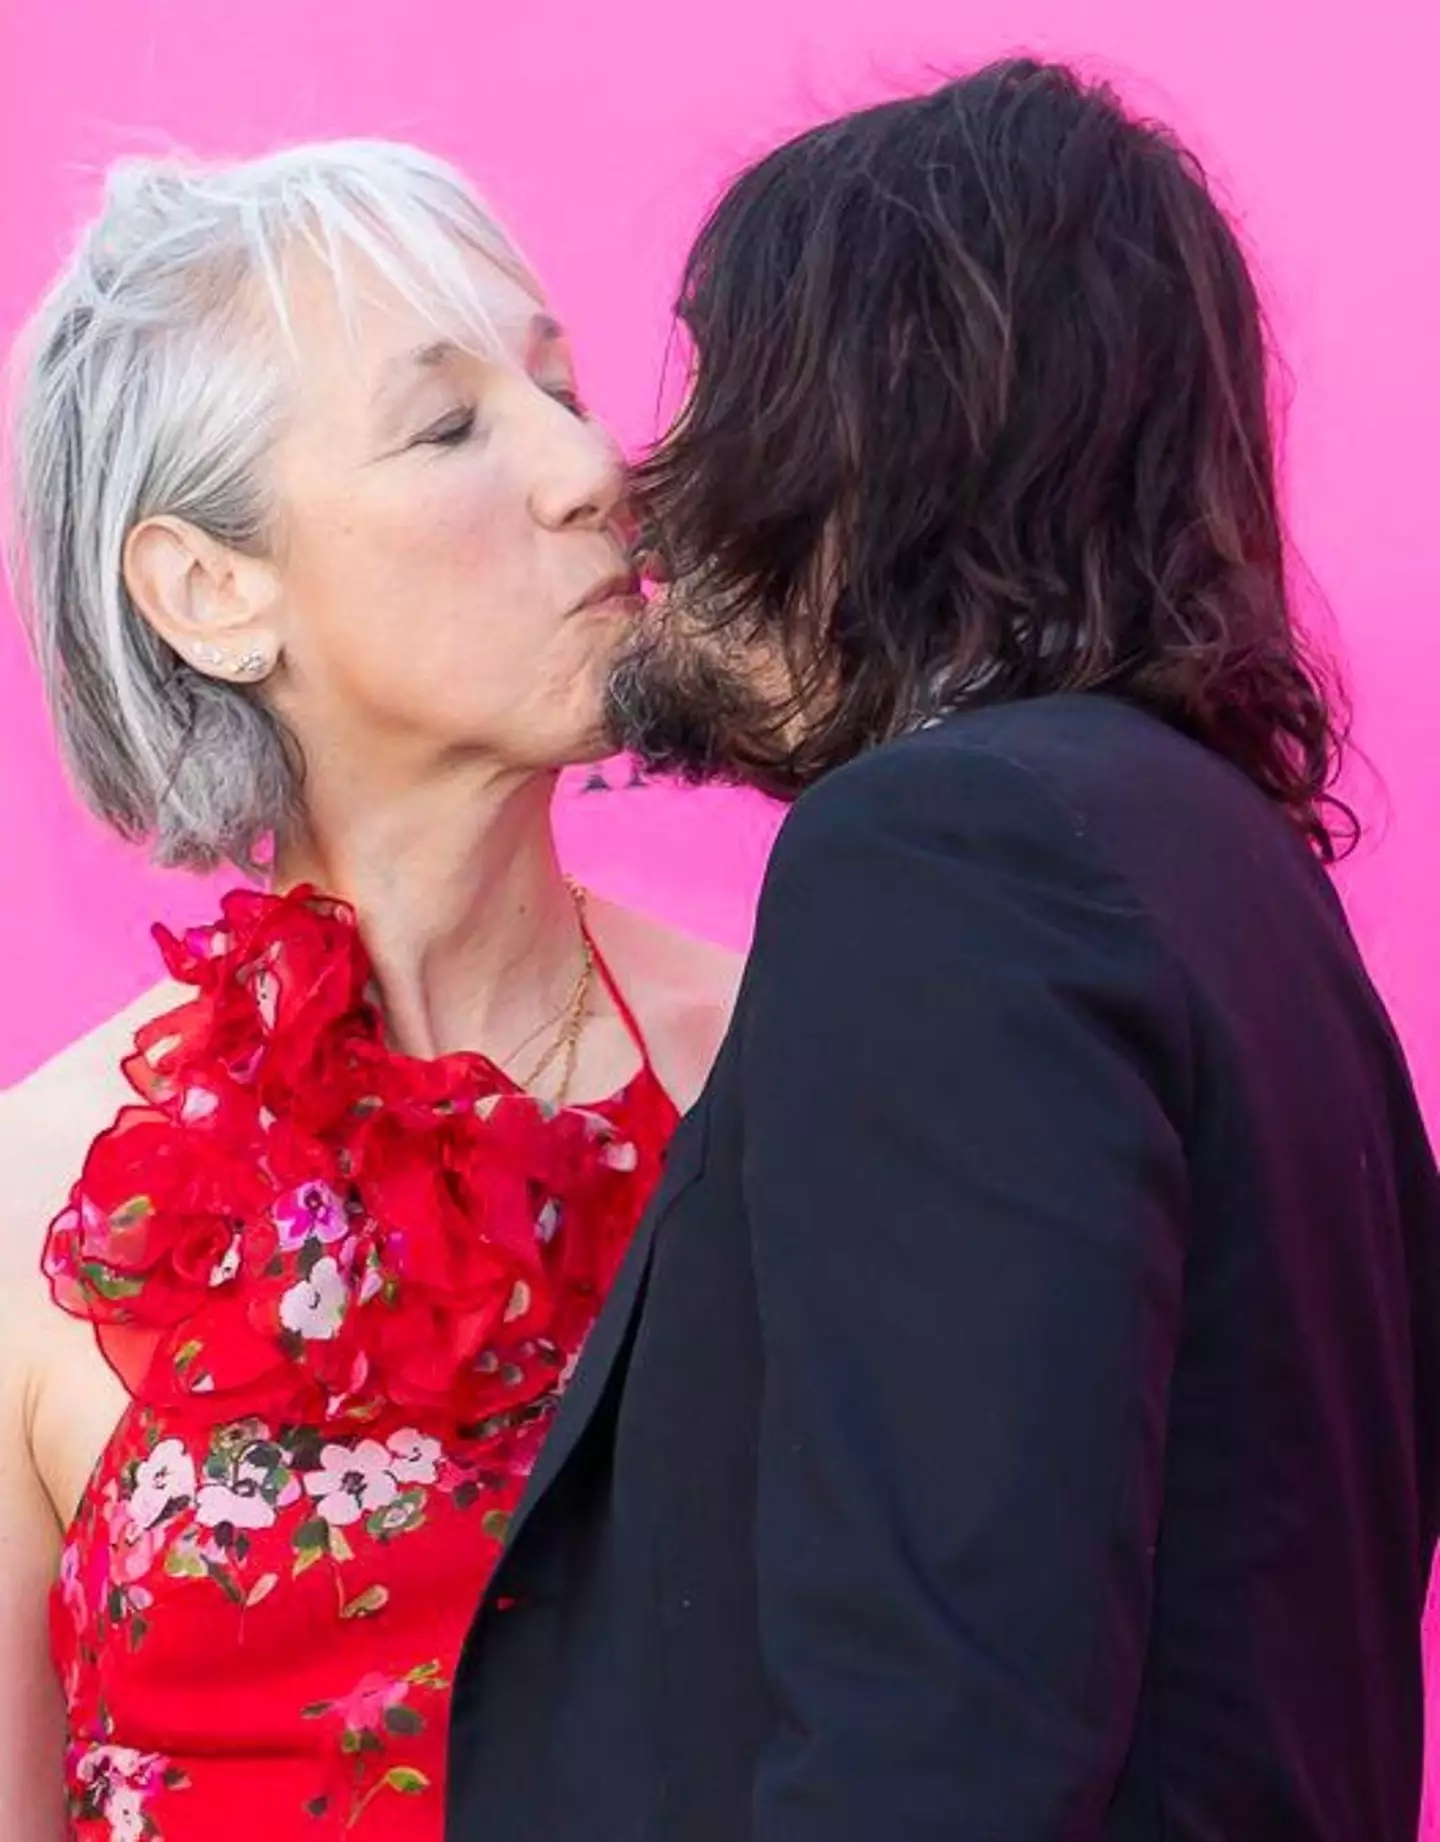 Keanu Reeves was pictured kissing his girlfriend at a recent red carpet event.